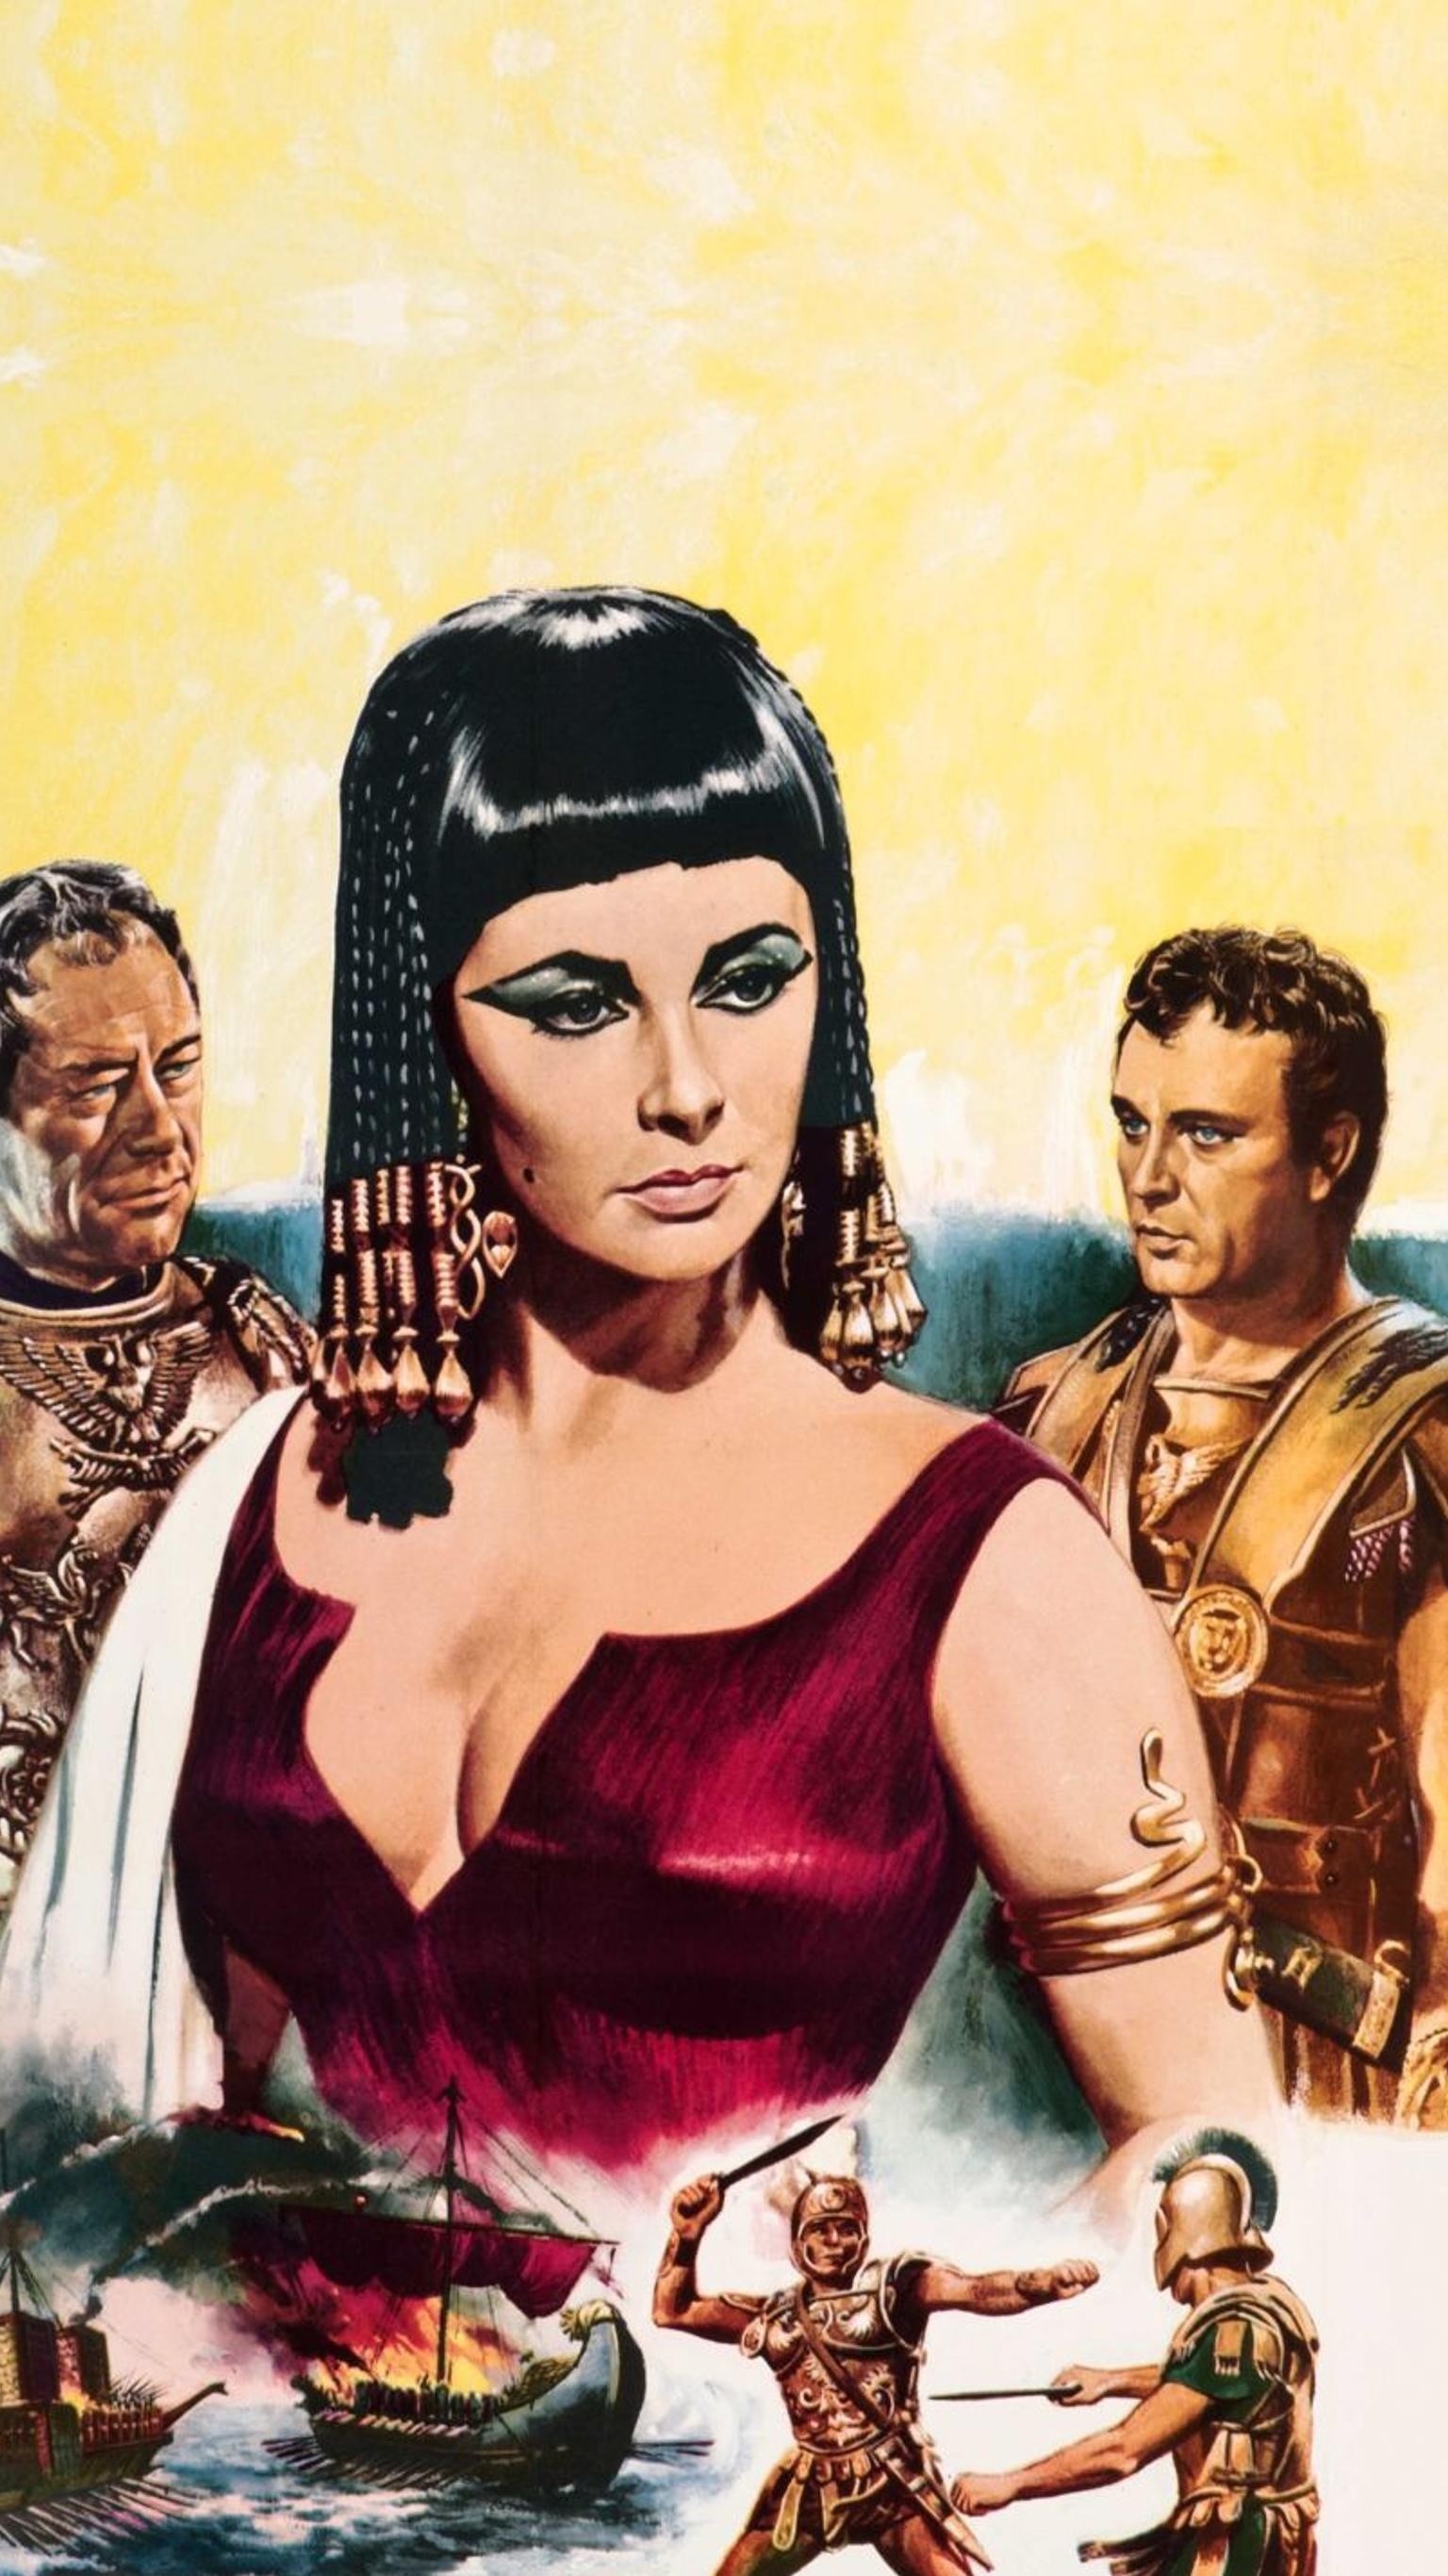 Cleopatra 1963 phone wallpaper, Movie homage, Classic film, Iconic character, 1540x2740 HD Phone